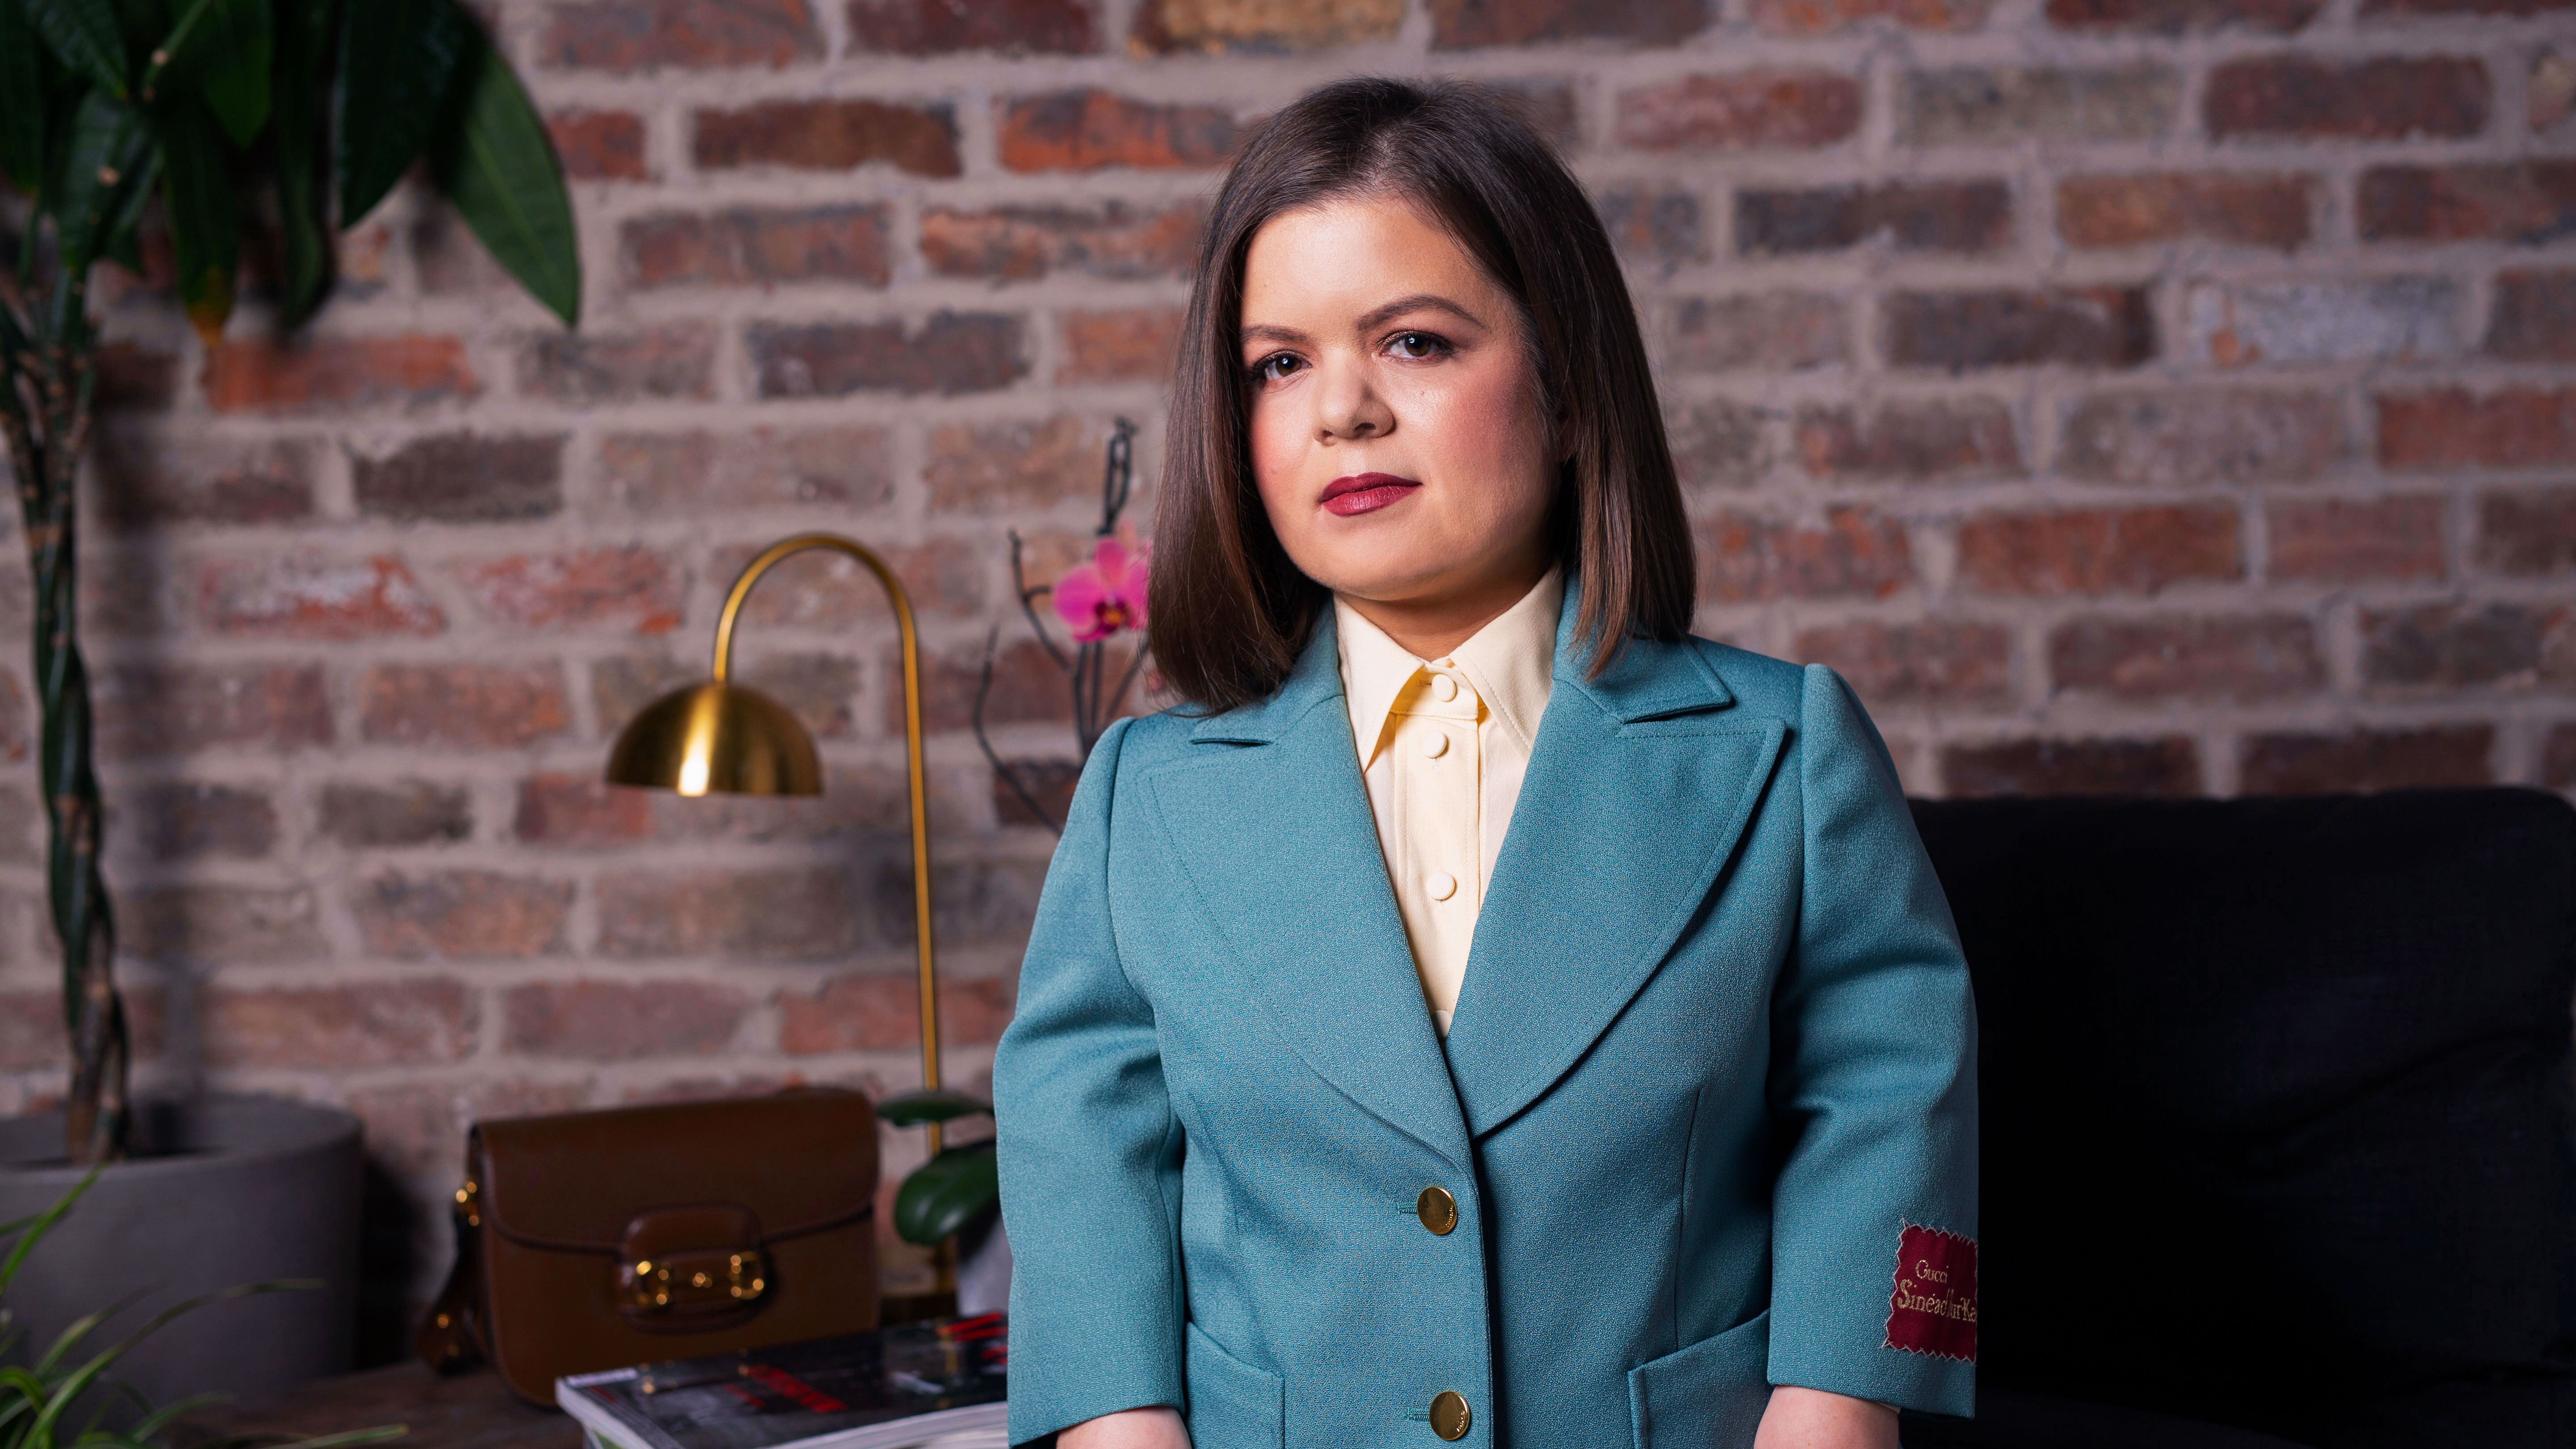 Sinead Burke, a white, visibly Disabled woman, stands in front of a brick wall in a teal Gucci suit.